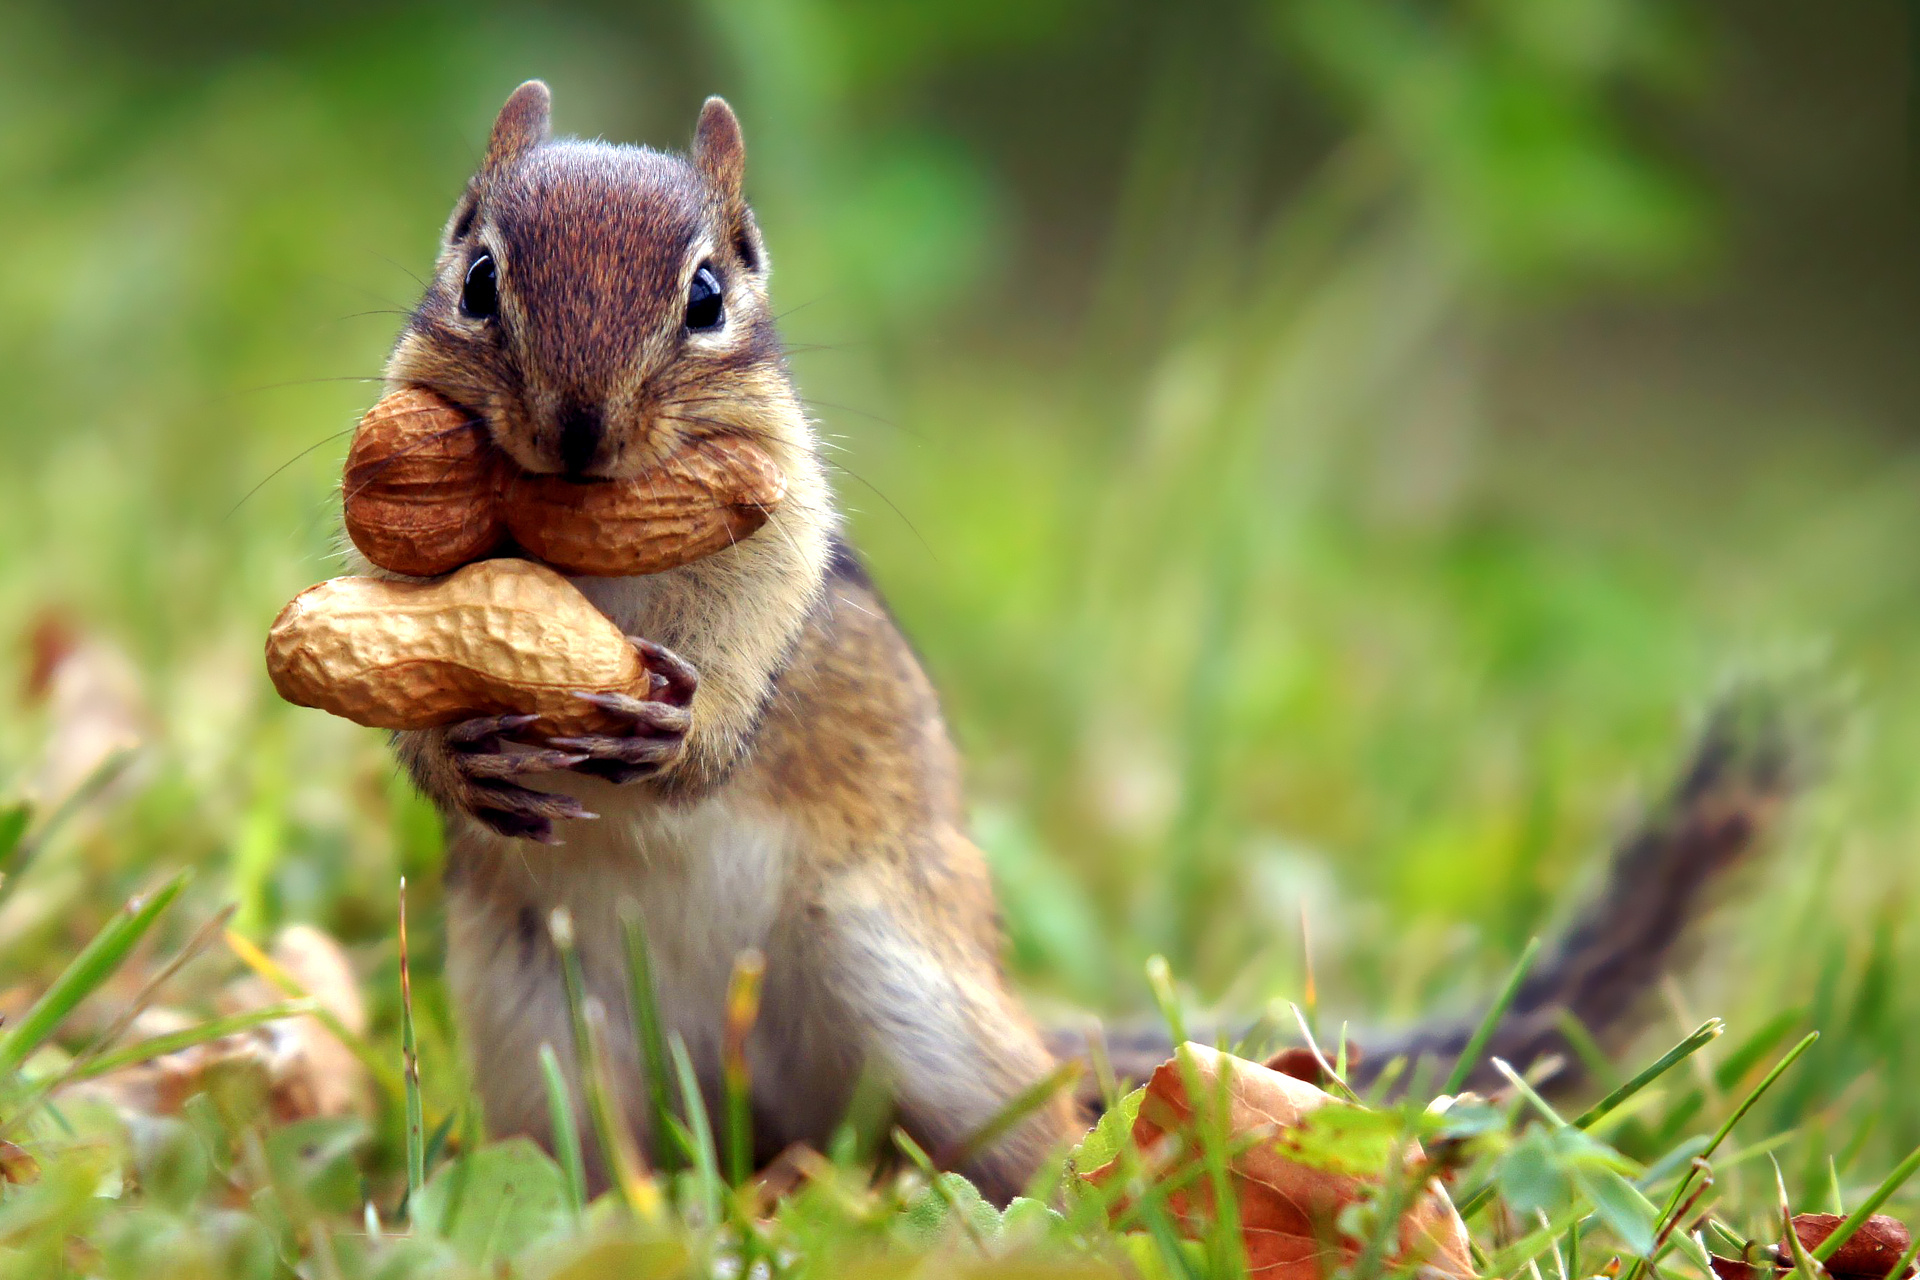 Chipmunk: Have expandable cheek pouches that allow them to carry food to their burrows. 1920x1280 HD Wallpaper.